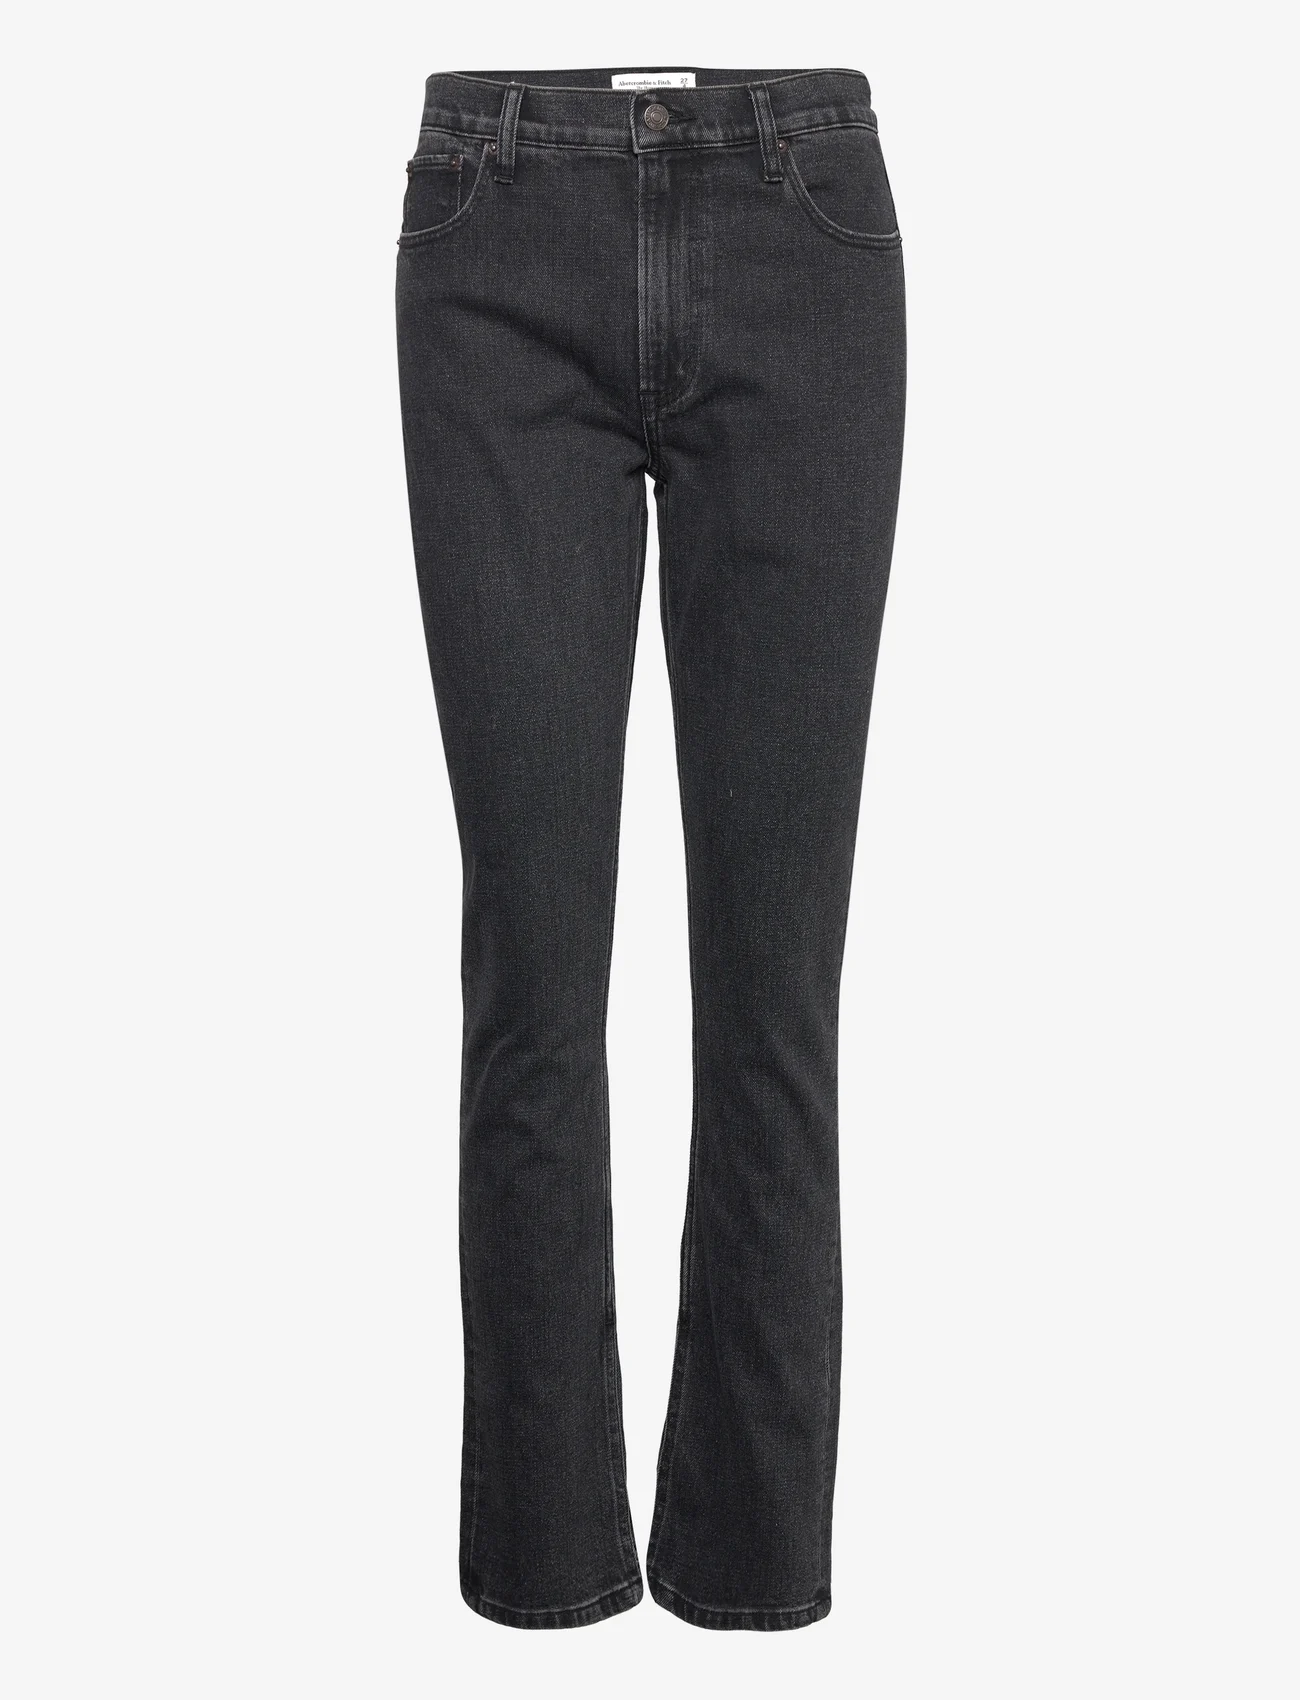 Abercrombie & Fitch - ANF WOMENS JEANS - slim jeans - black - 0